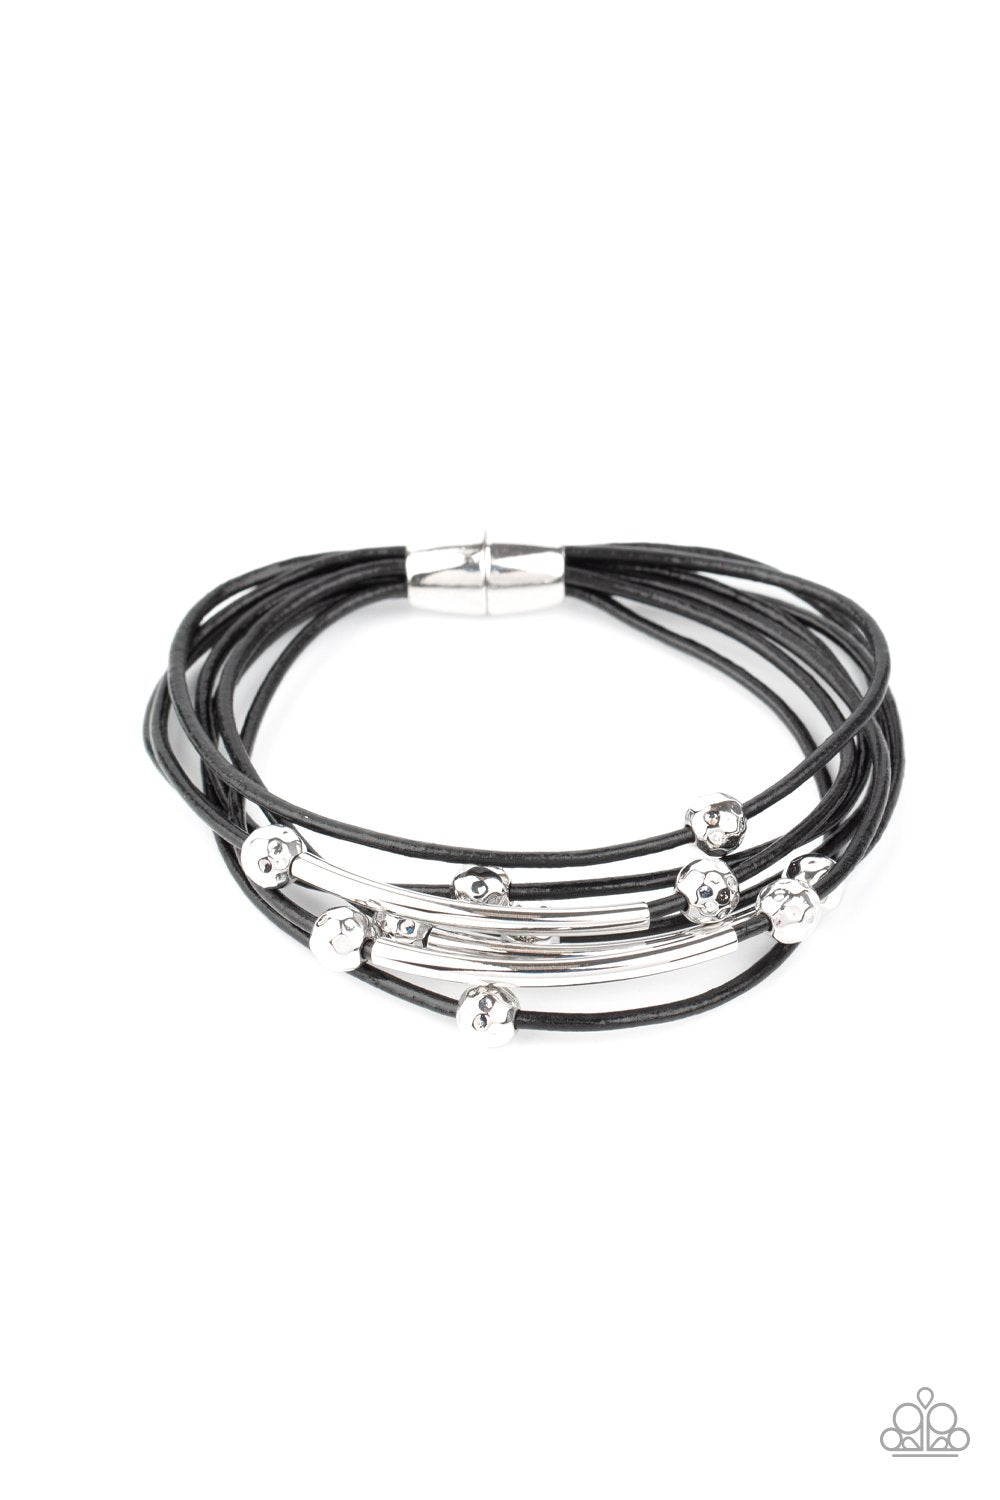 Magnetically Modern Black and Silver Bracelet - Paparazzi Accessories-CarasShop.com - $5 Jewelry by Cara Jewels